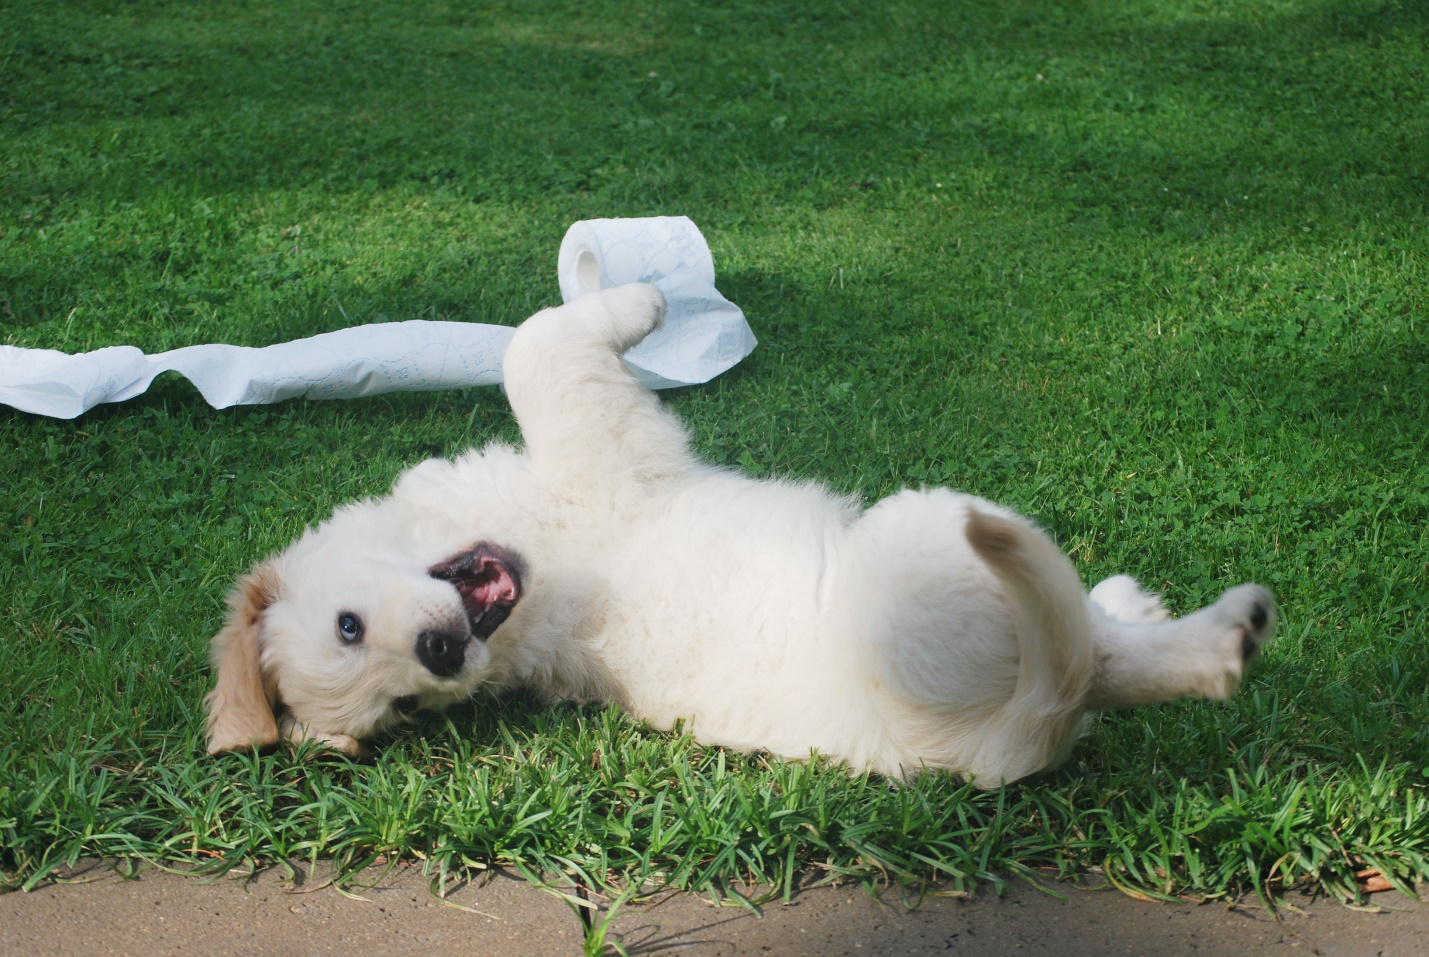 Puppy Lying in Grass Next to Toilet Paper